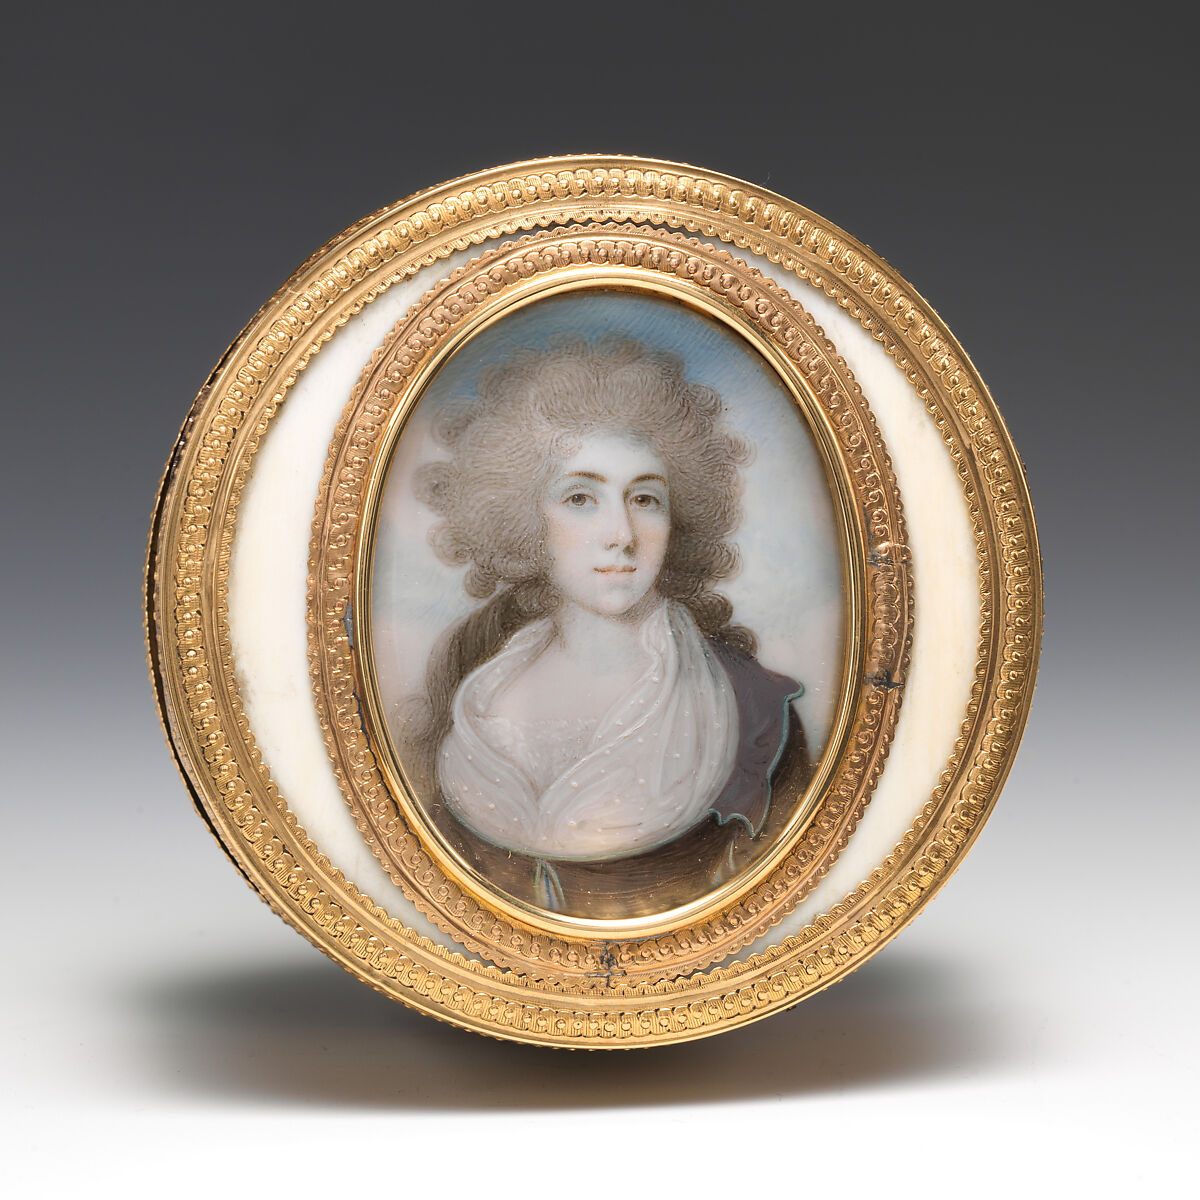 Box with portrait of a woman, Guillaume-Denis Delamotte (French, born 1725, master 1756, active 1793), Gold, glass; ivory, French, Paris box with British miniature 